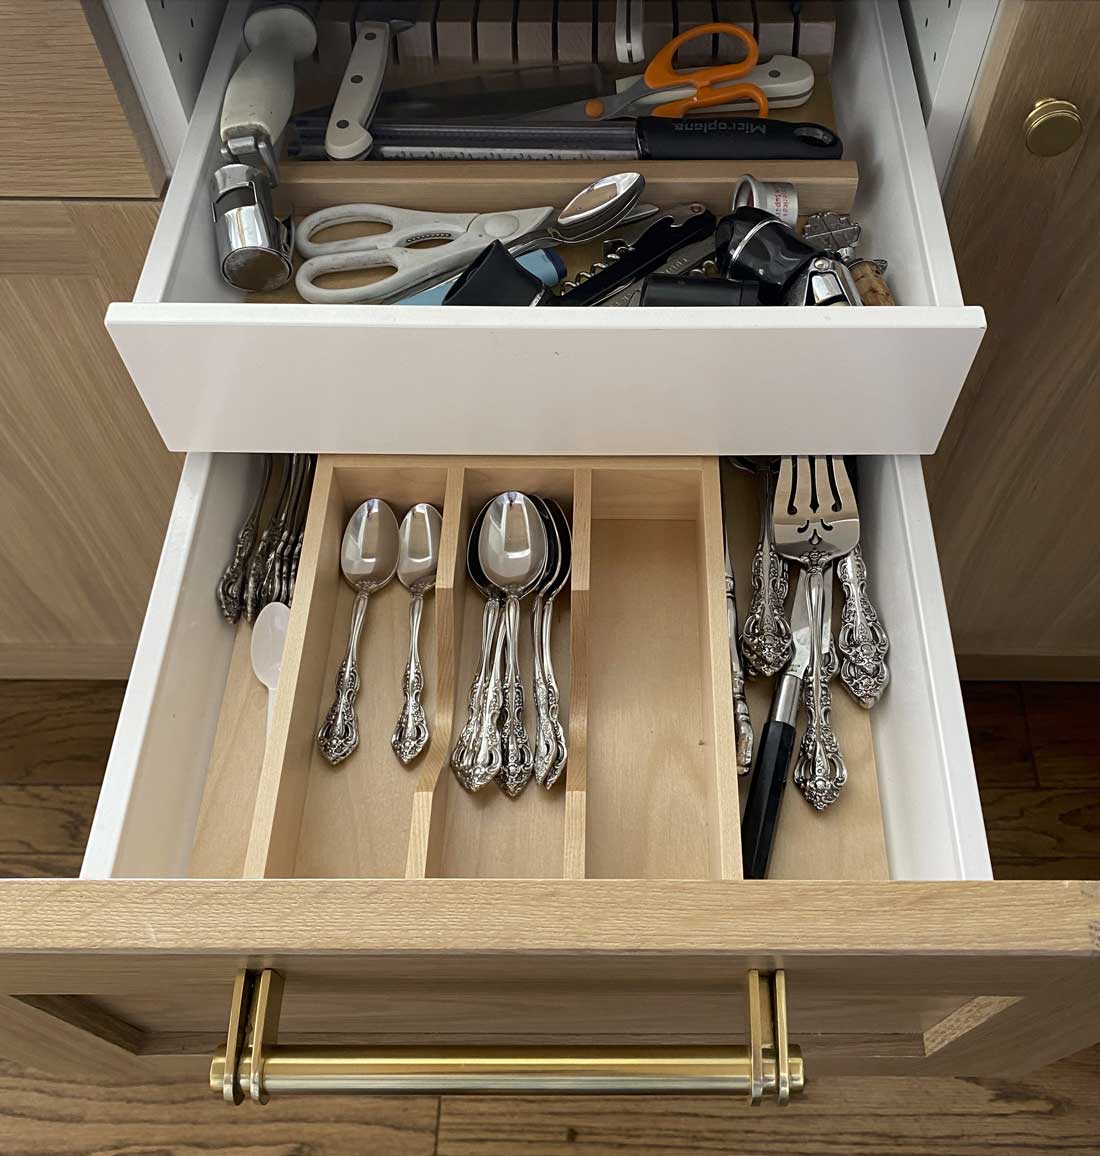 custom hidden drawer for silverware and other miscellaneous items